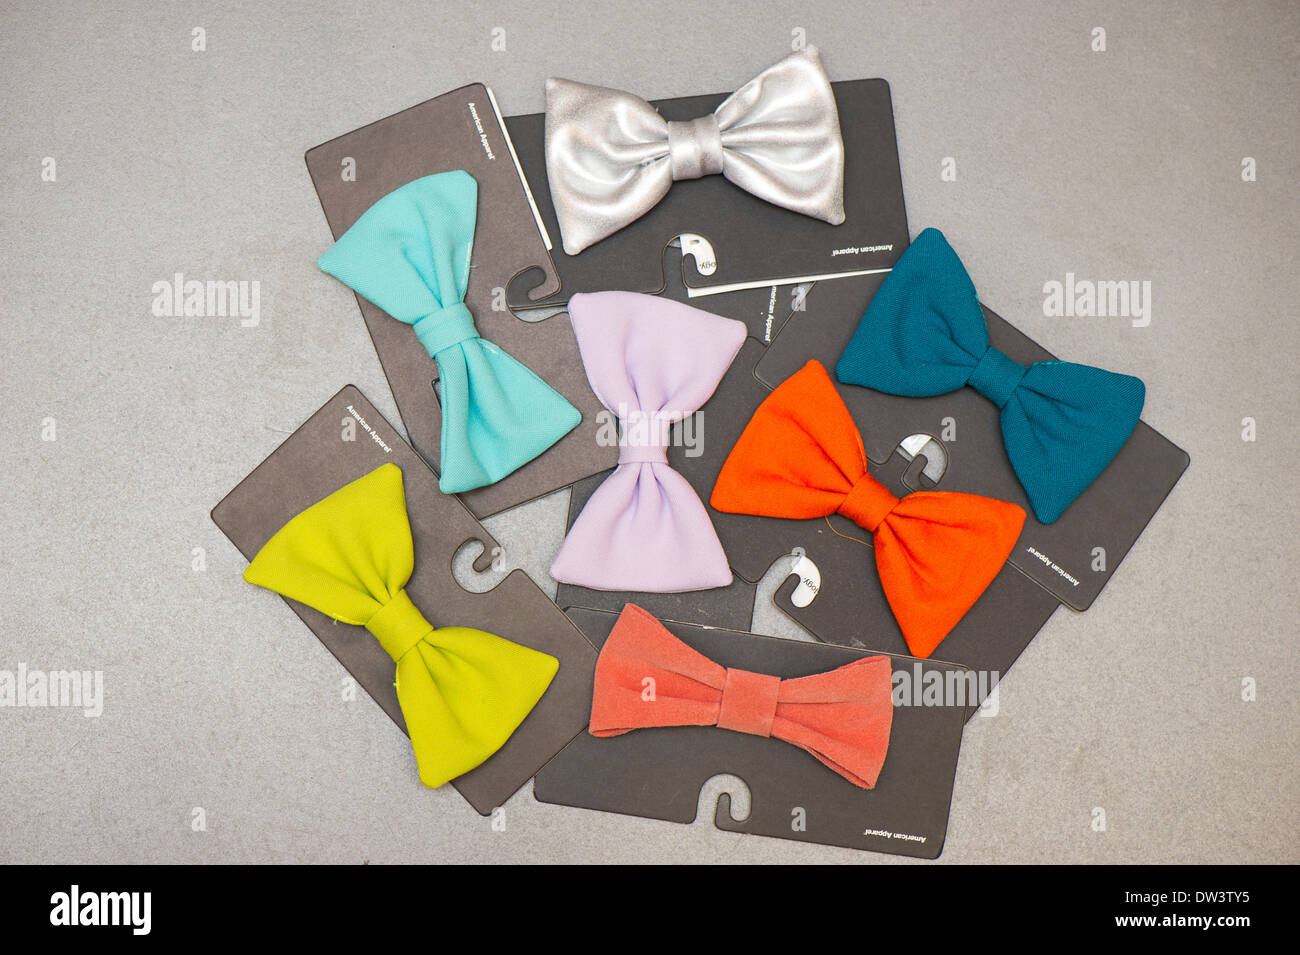 Colourful selection of bow ties. Stock Photo